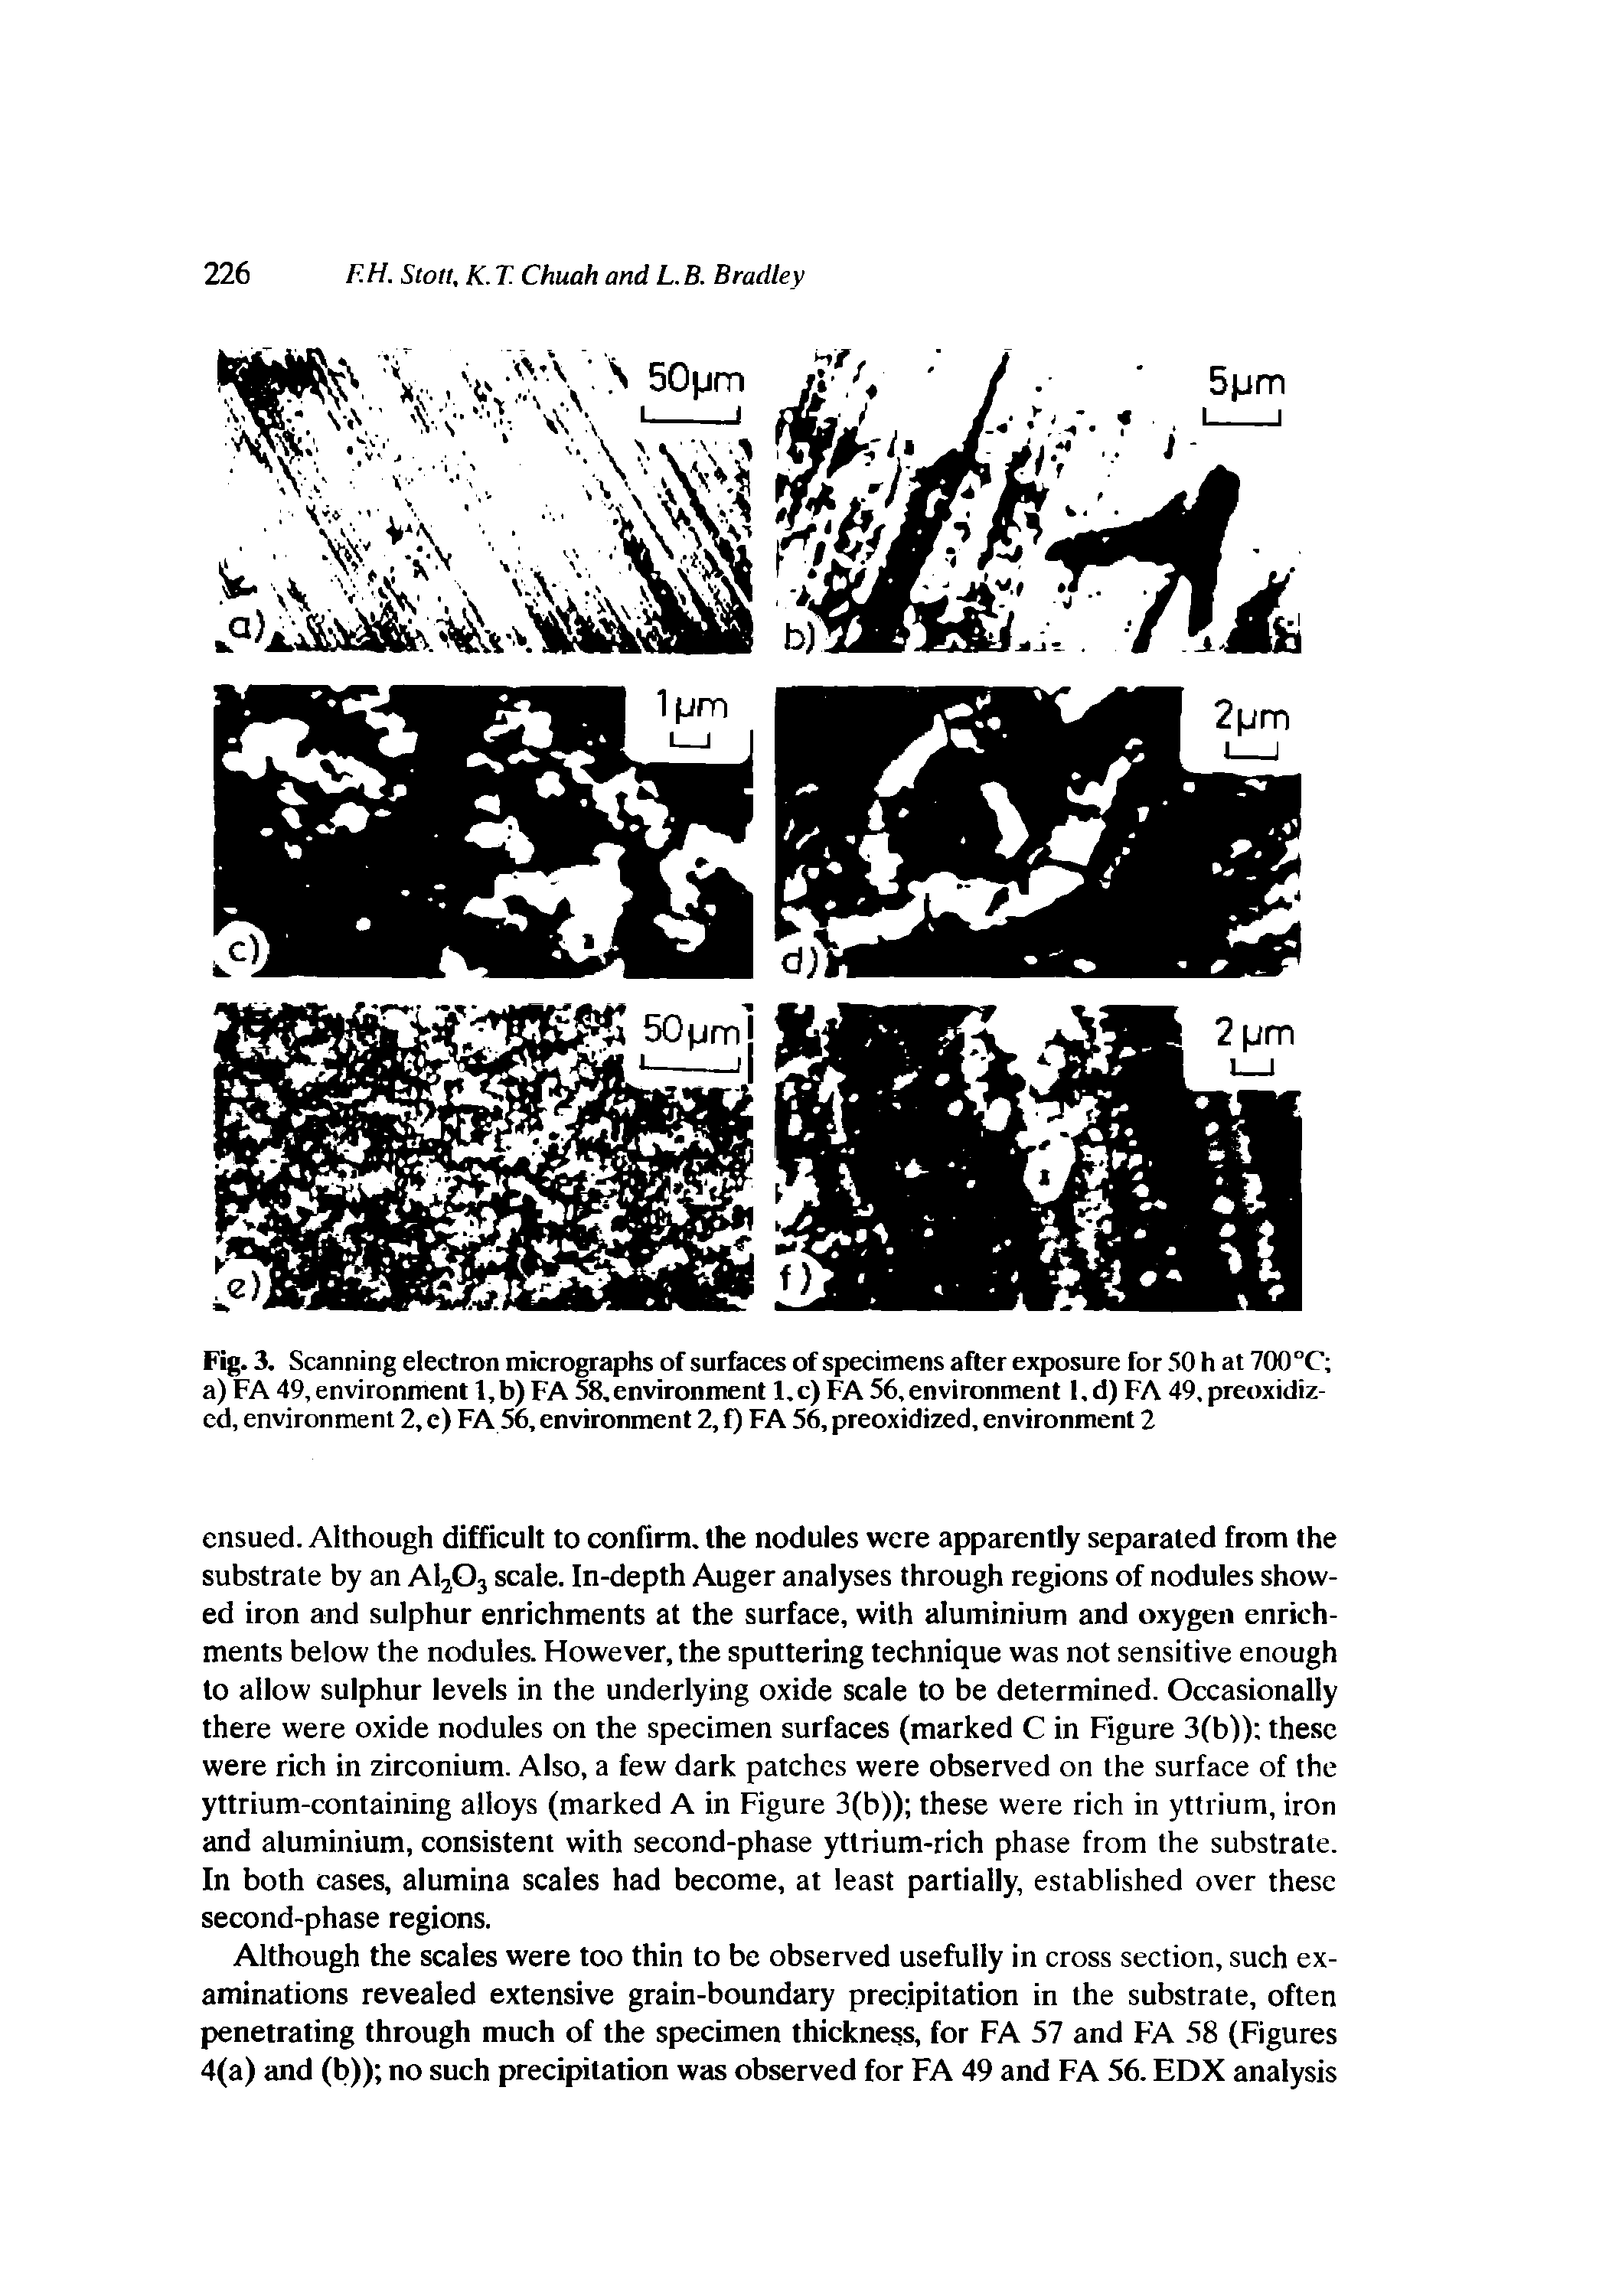 Fig. 3. Scanning electron micrographs of surfaces of specimens after exposure for 50 h at 700°C a) FA 49, environment 1, b) FA 58, environment 1. c) FA 56, environment 1, d) FA 49, preoxidized, environment 2, e) FA 56, environment 2, f) FA 56, preoxidized, environment 2...